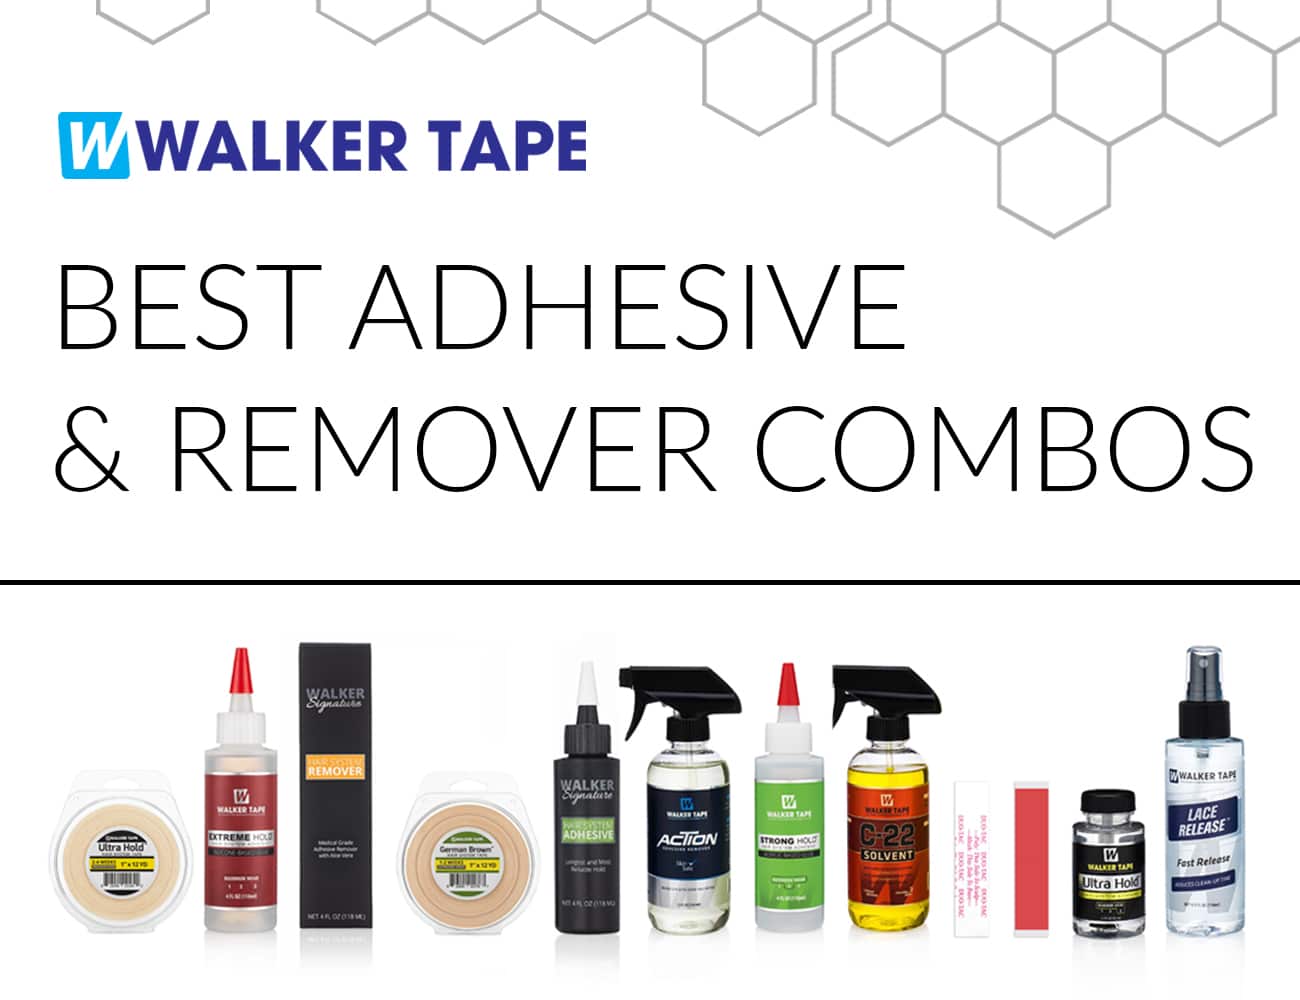 Best Adhesive & Remover Combos for Removing Walker Tape Products